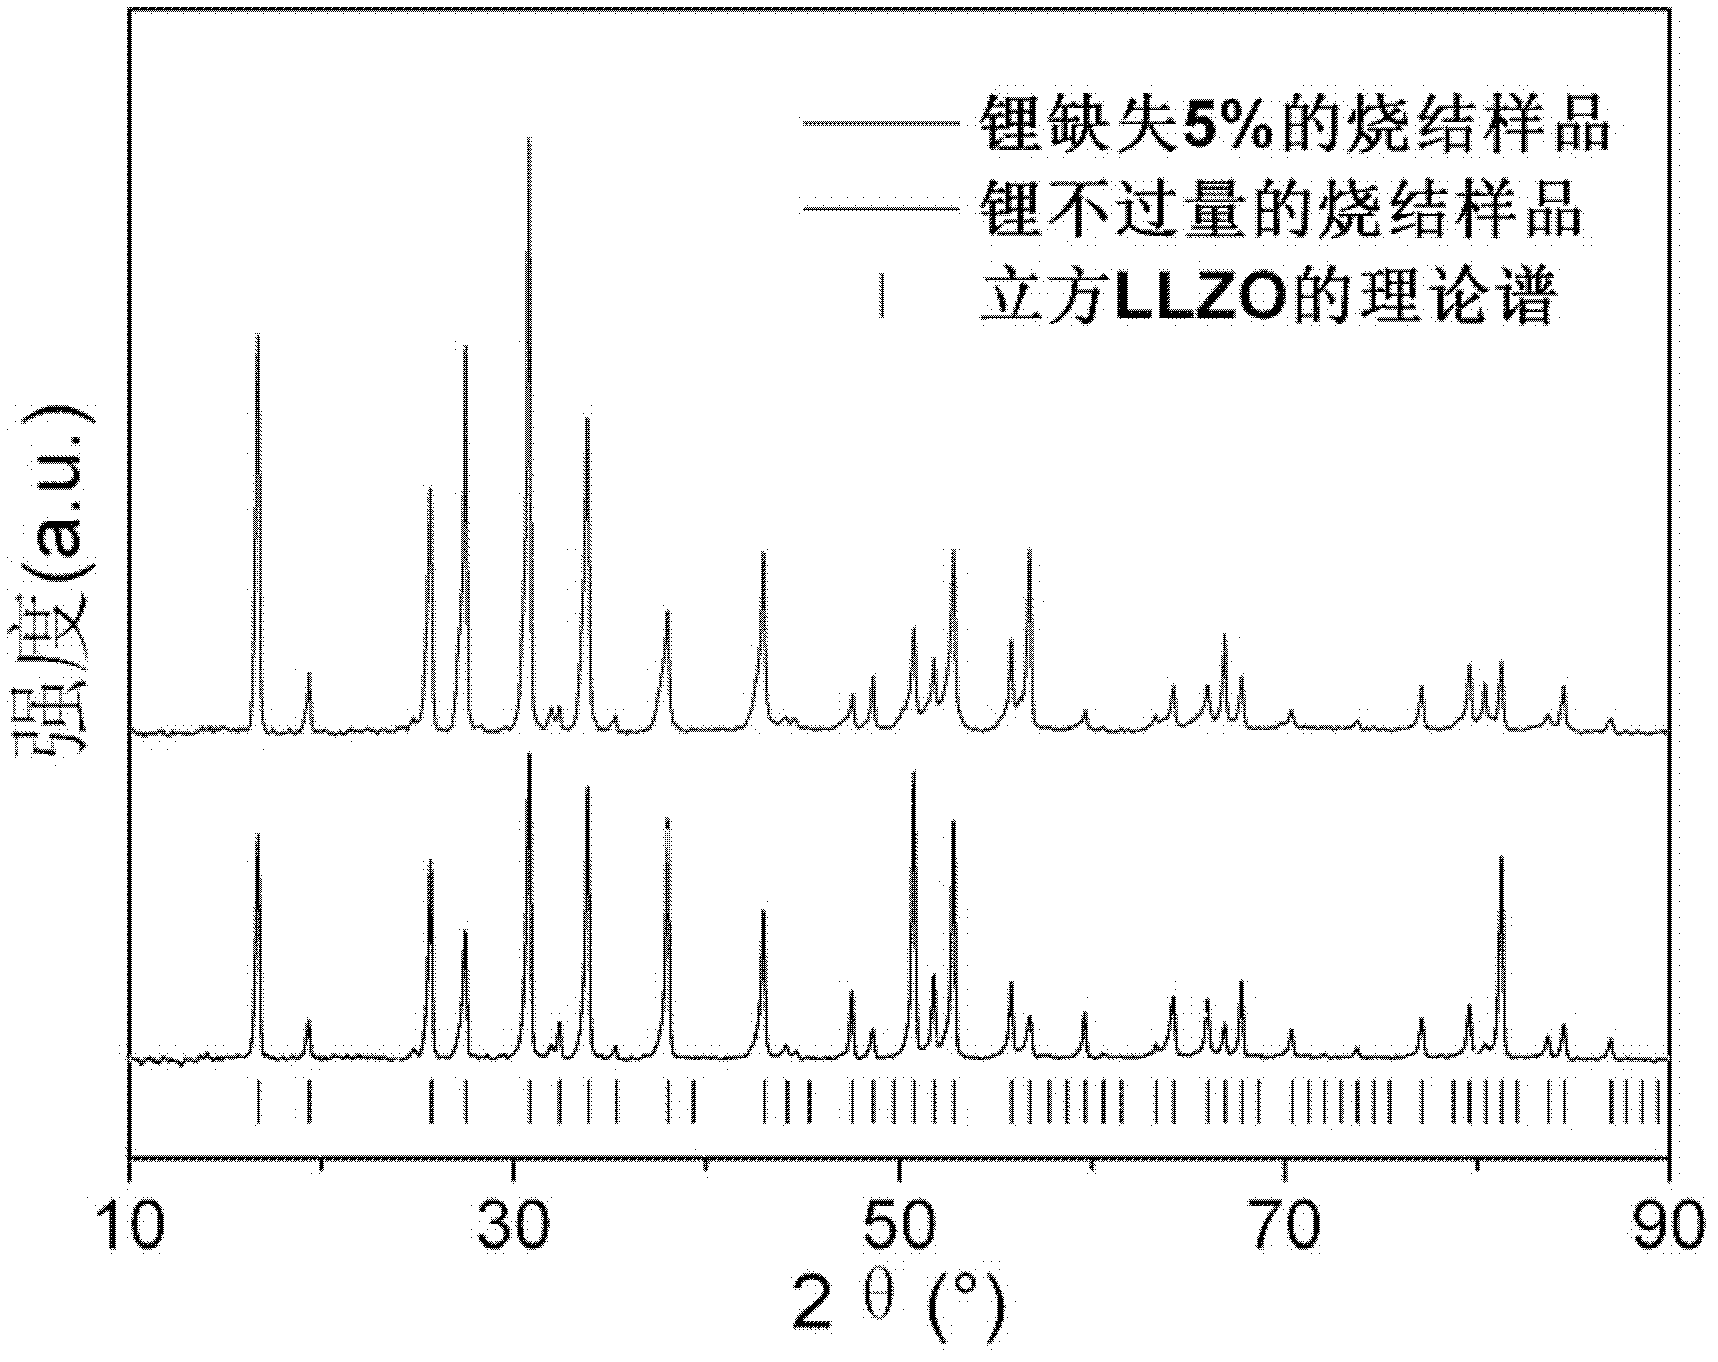 Lithium lanthanum zirconium oxide solid electrolyte material and its preparation method and application